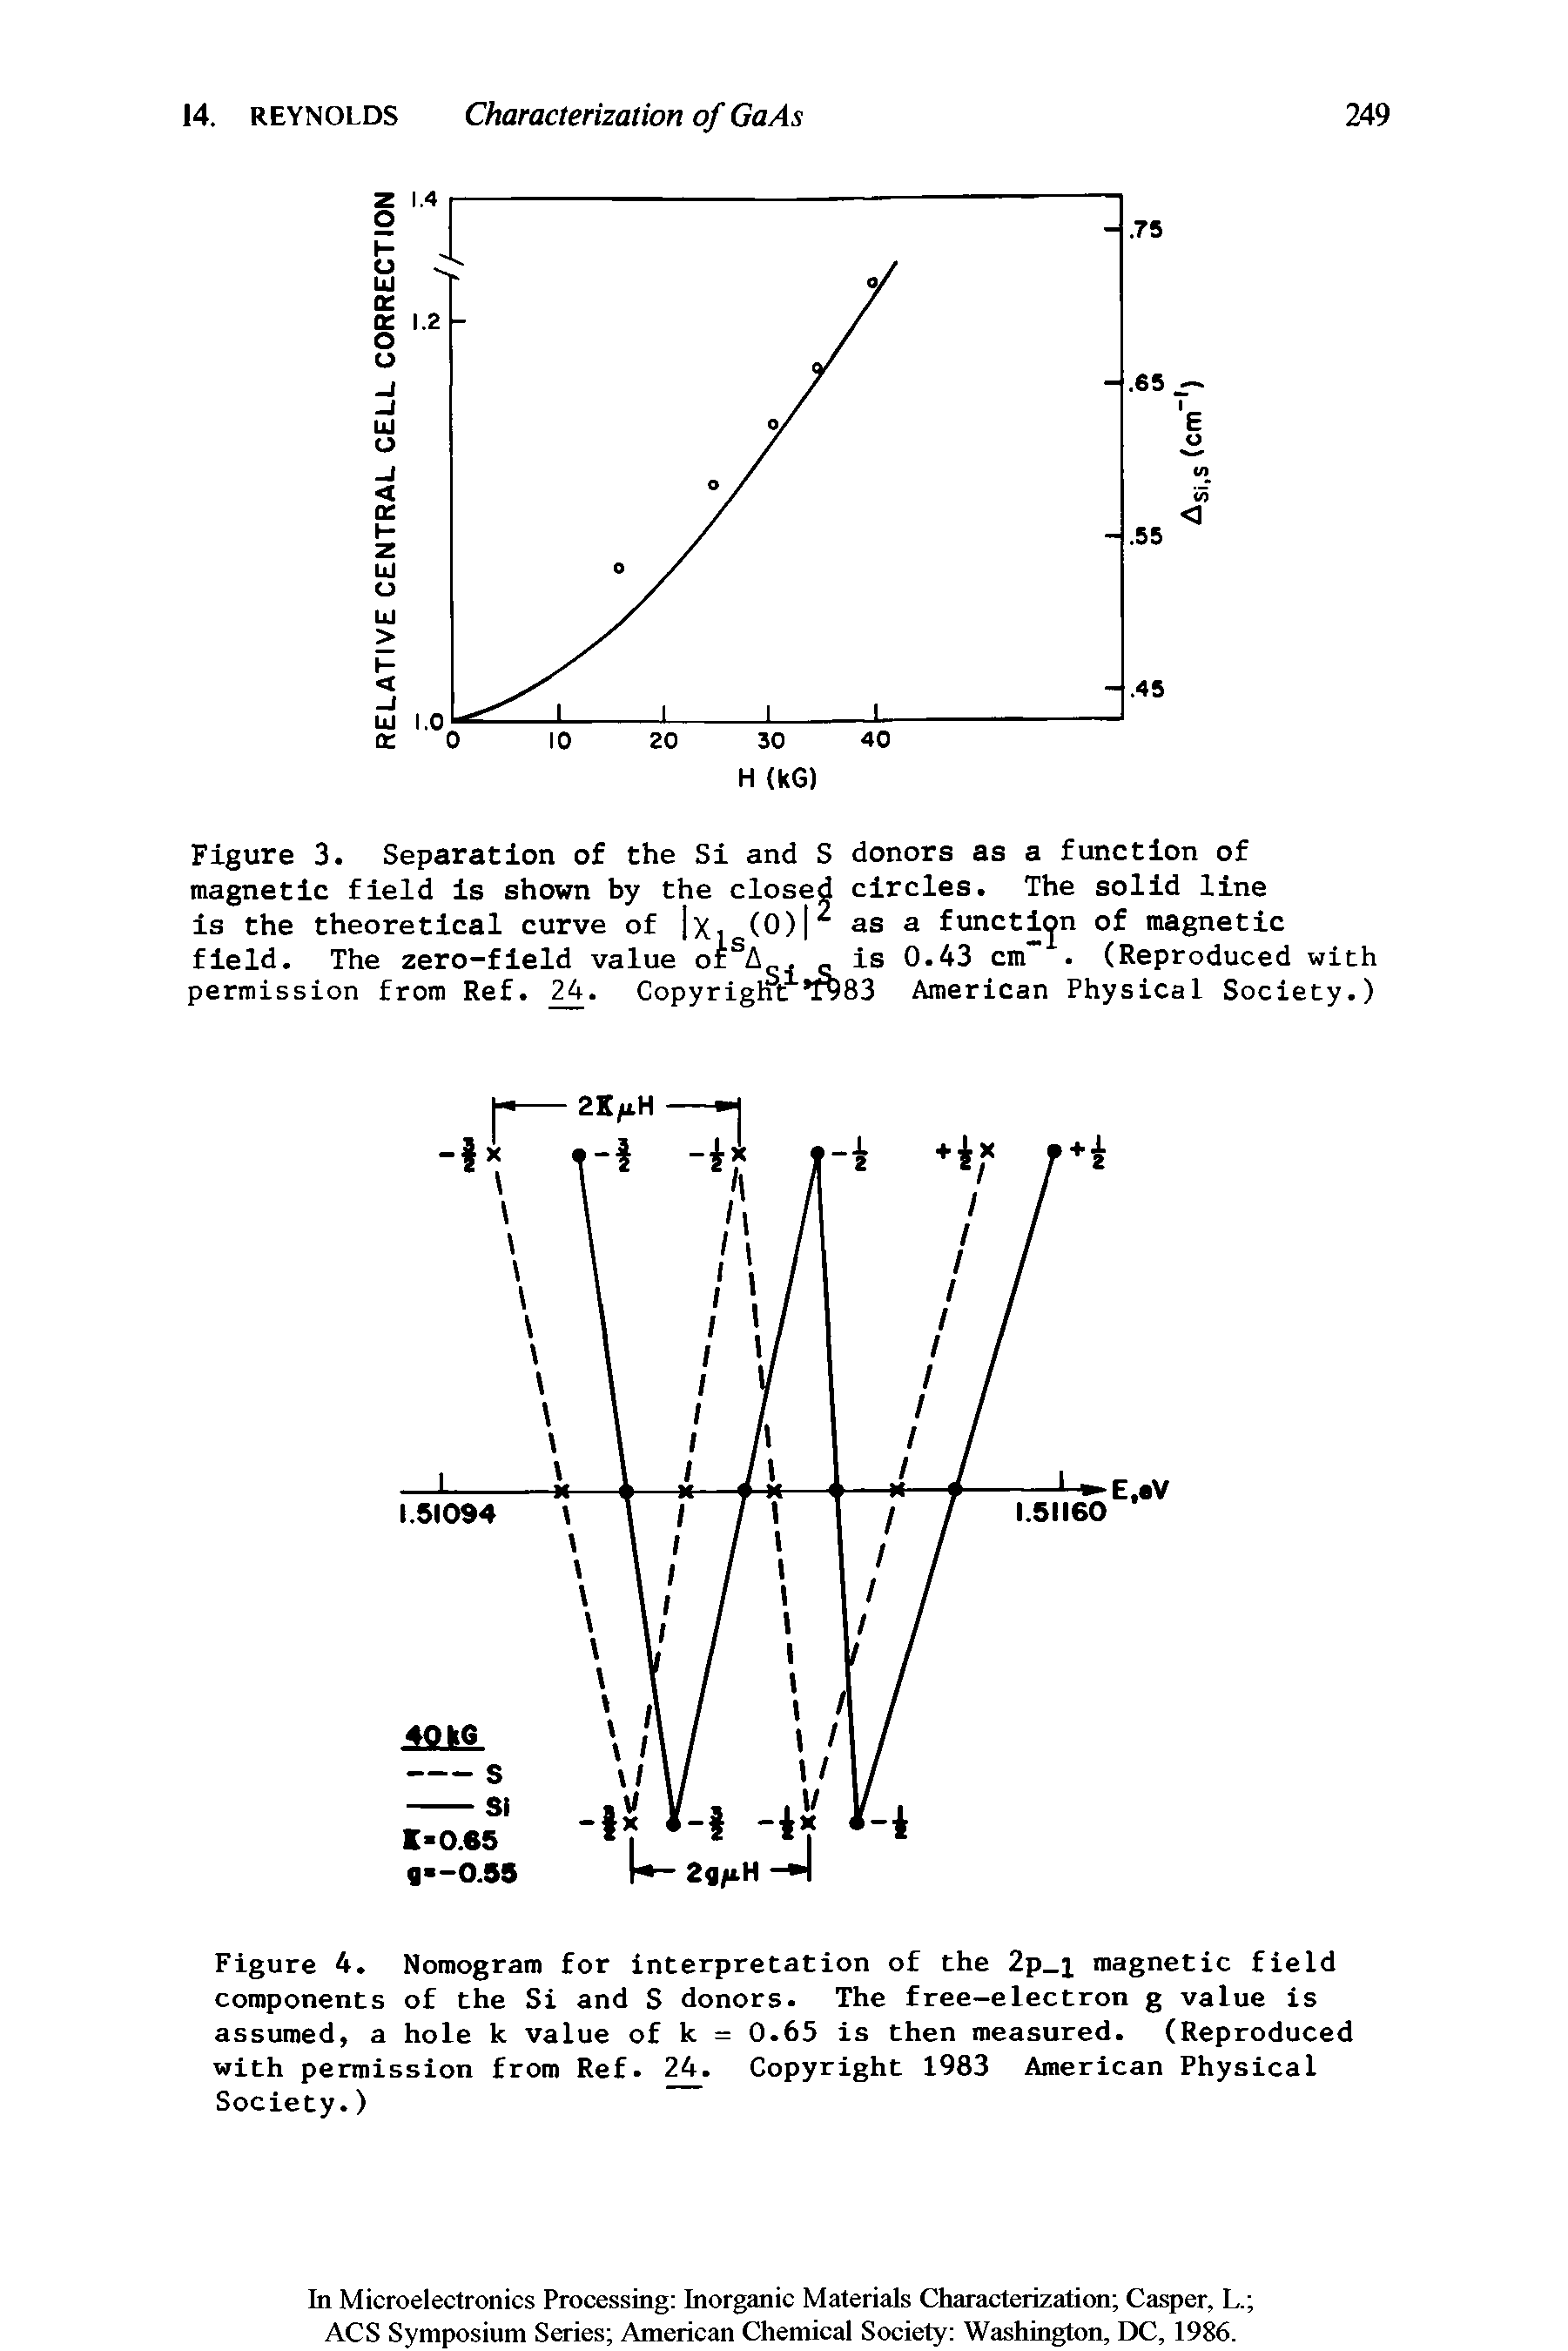 Figure 4. Nomogram for interpretation of the 2p i magnetic field components of the Si and S donors. The free-electron g value is assumed, a hole k value of k = 0.65 is then measured. (Reproduced with permission from Ref. 24. Copyright 1983 American Physical Society.)...